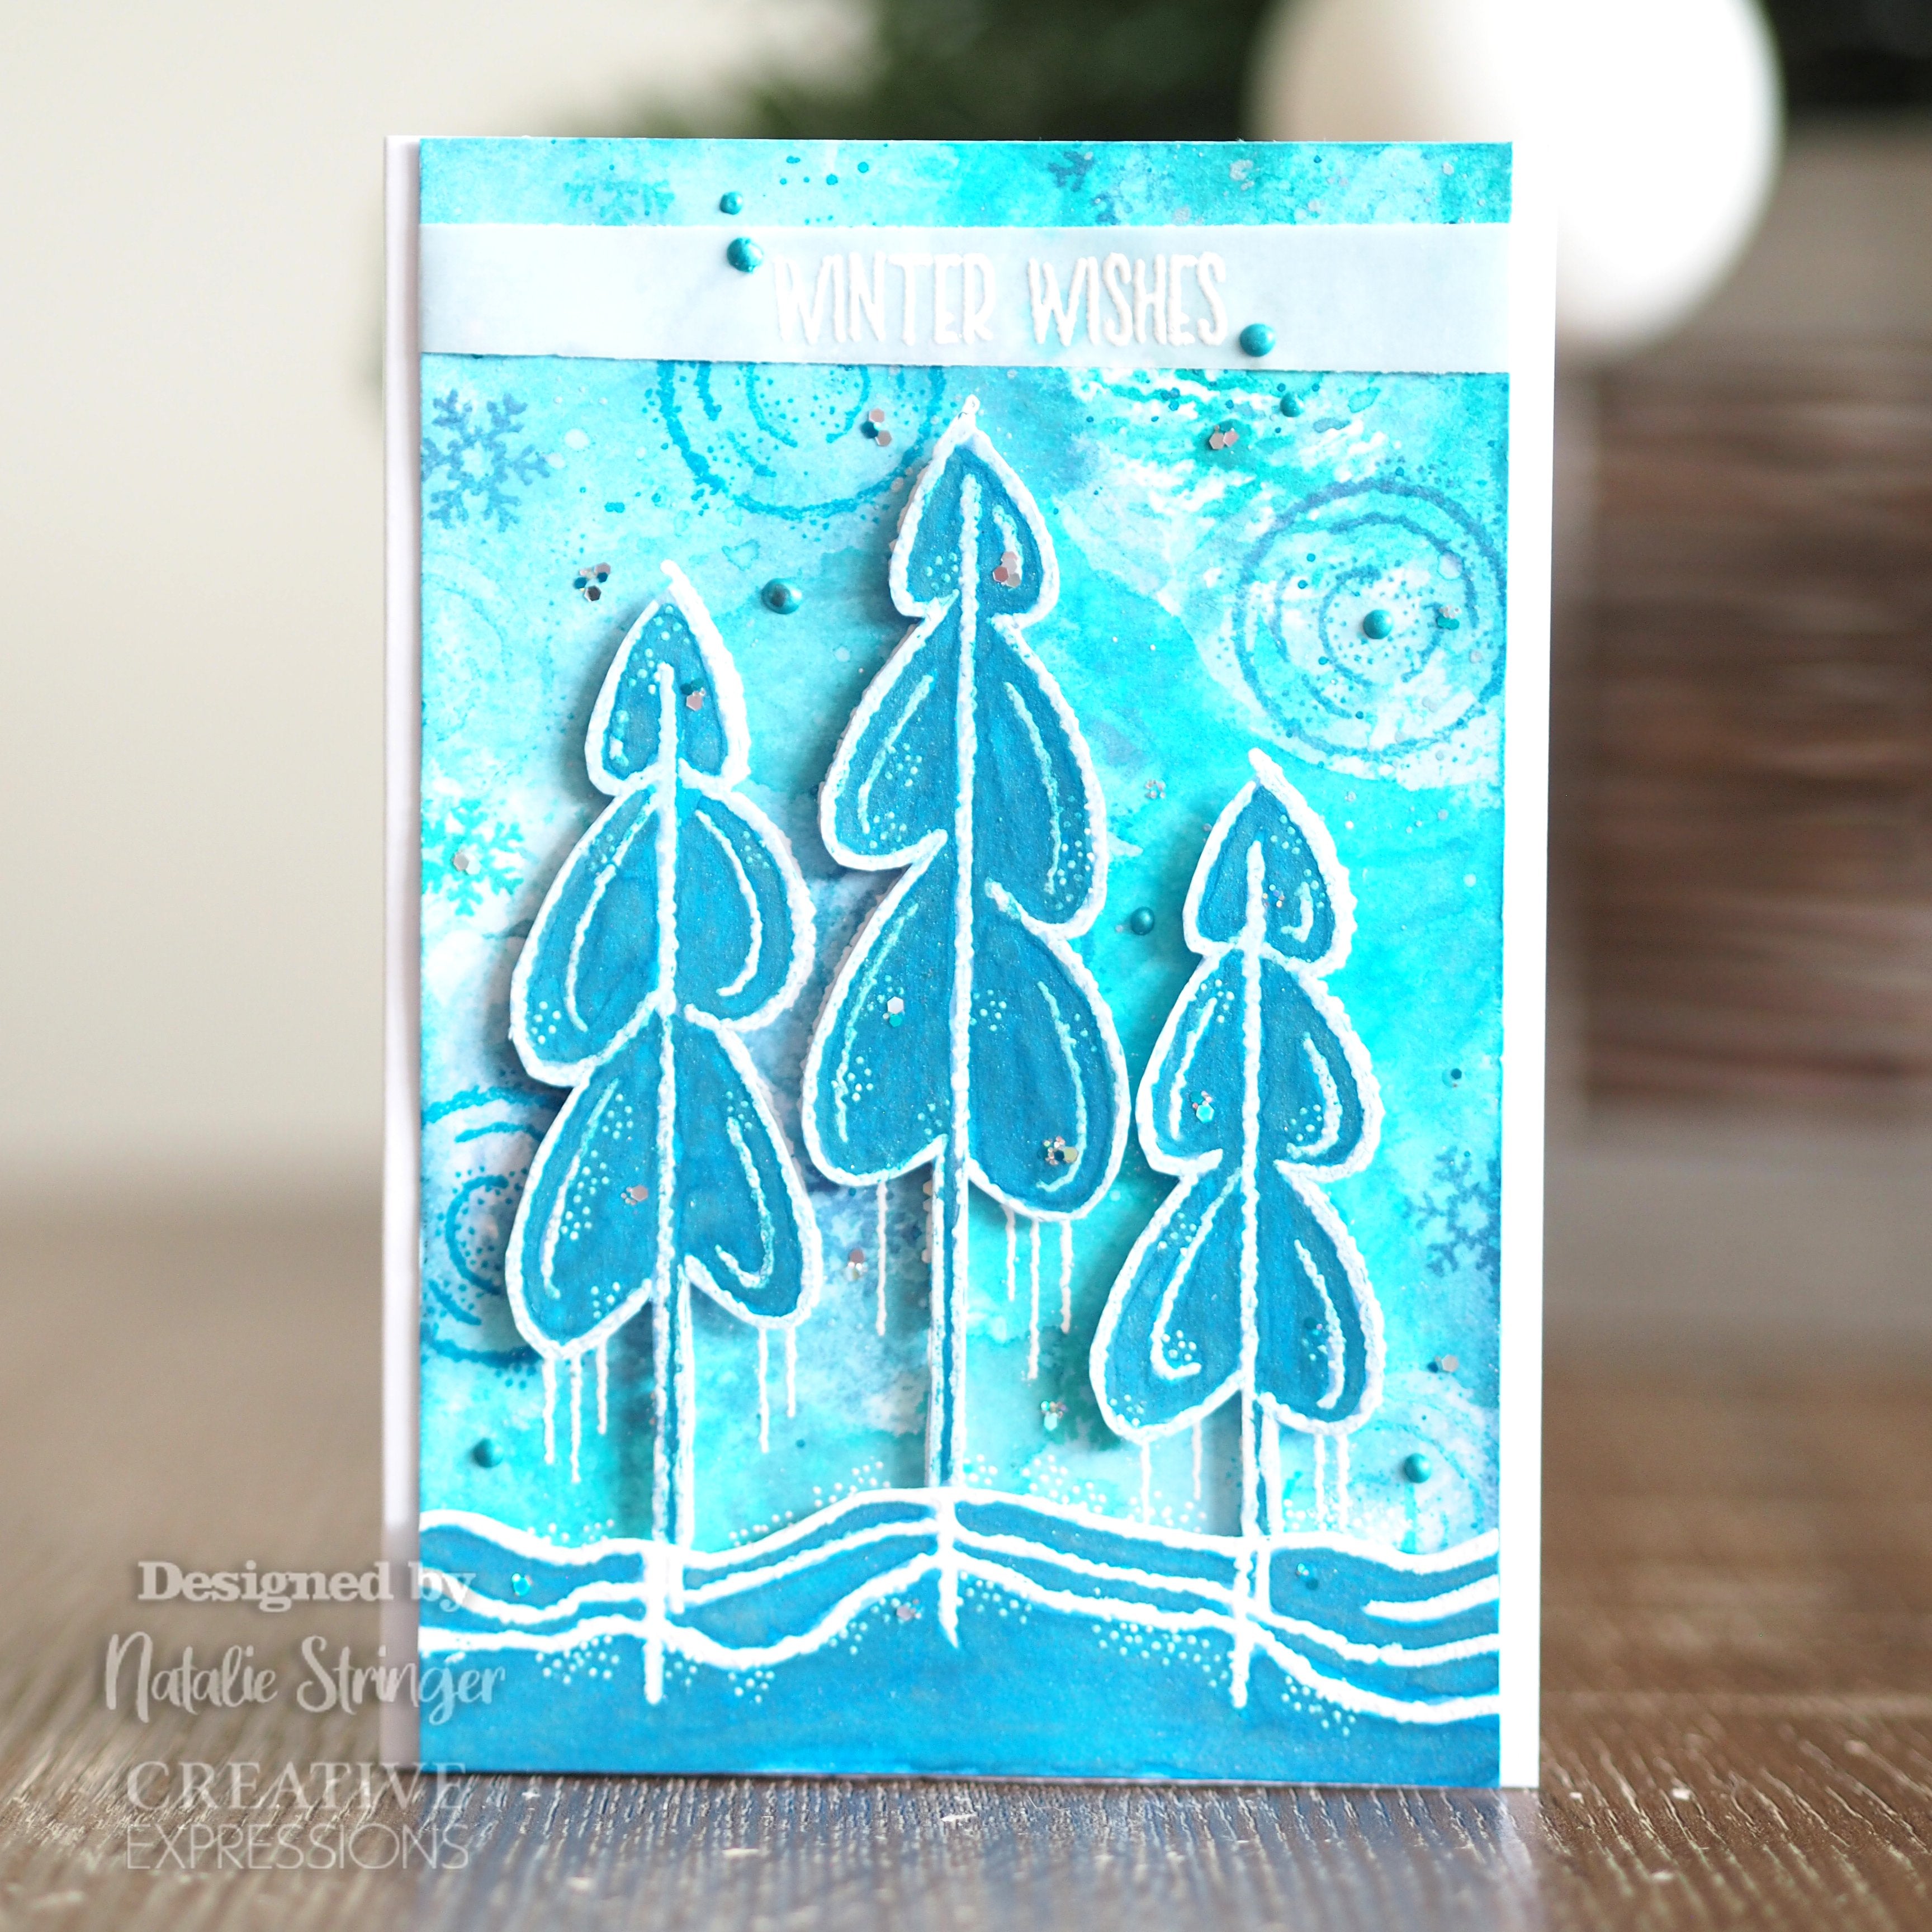 Woodware Clear Singles Winter Trees 4 in x 6 in Stamp